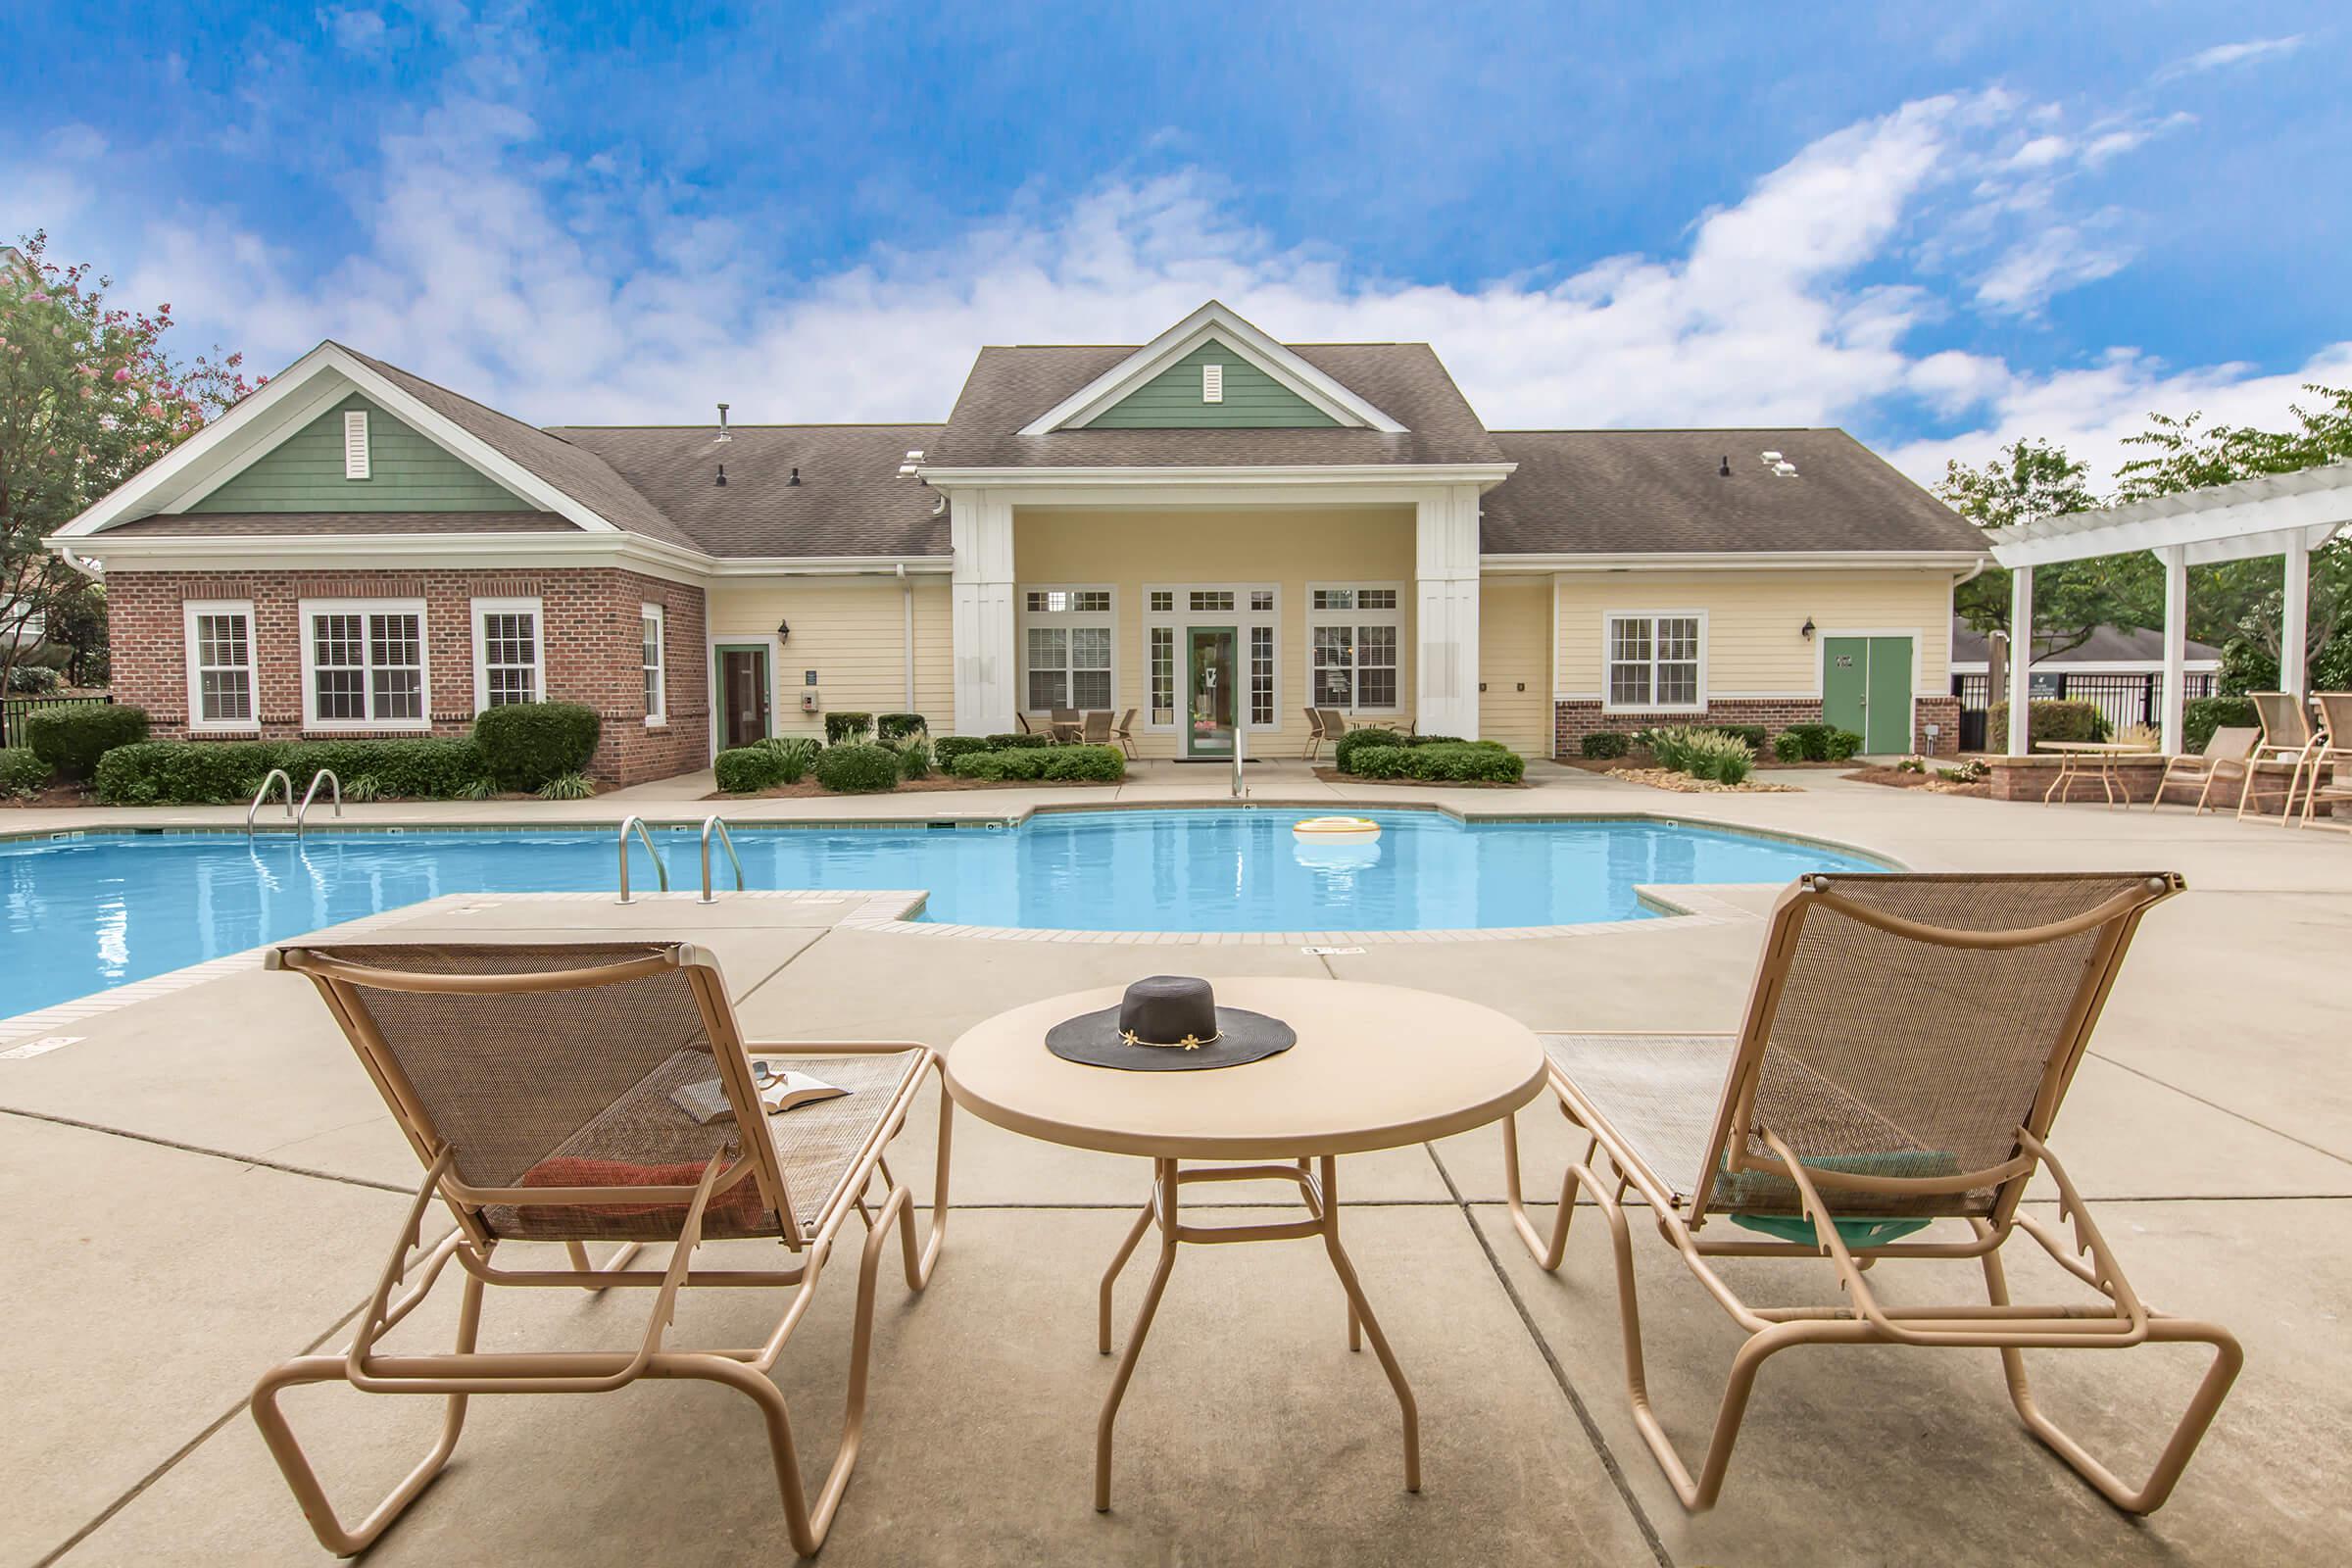 Relax Beside Our Sparkling Swimming Pool At Heather Ridge In Charlotte, NC